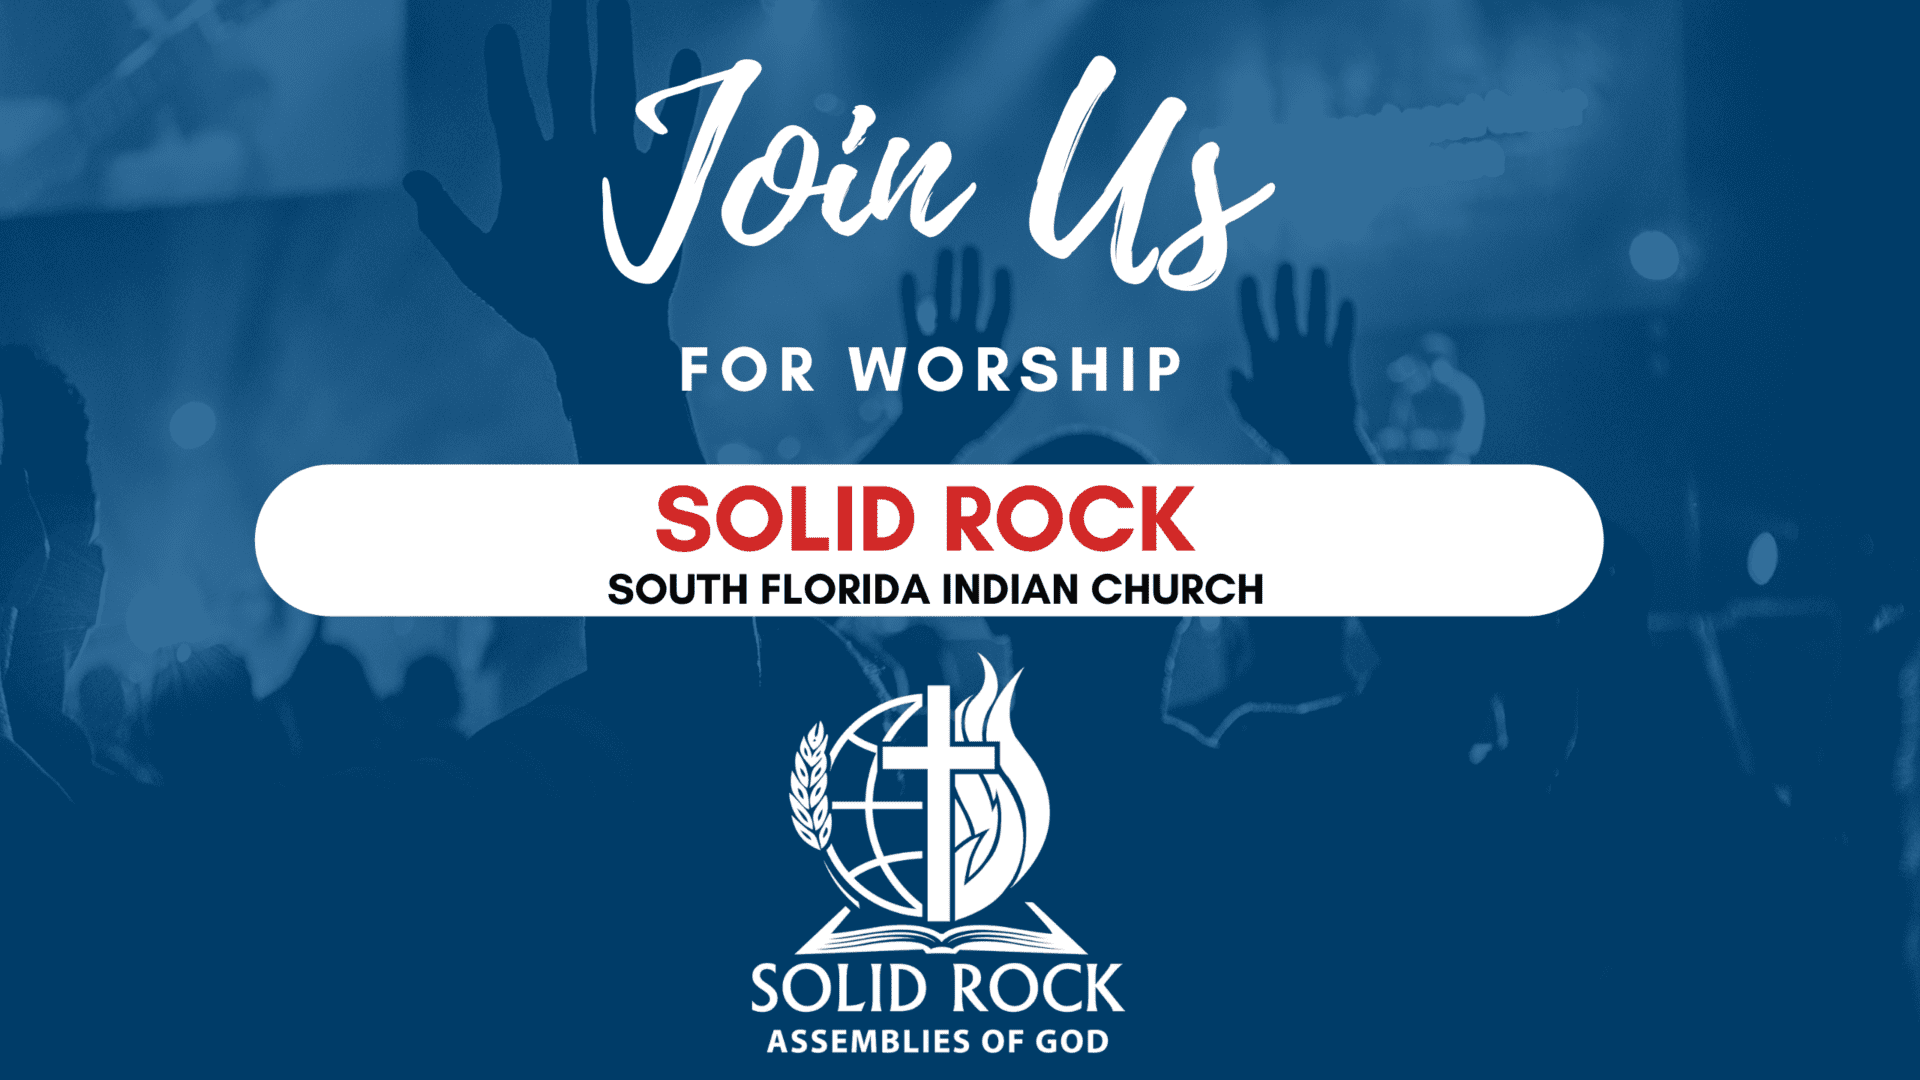 Join us solid rock poster with a logo